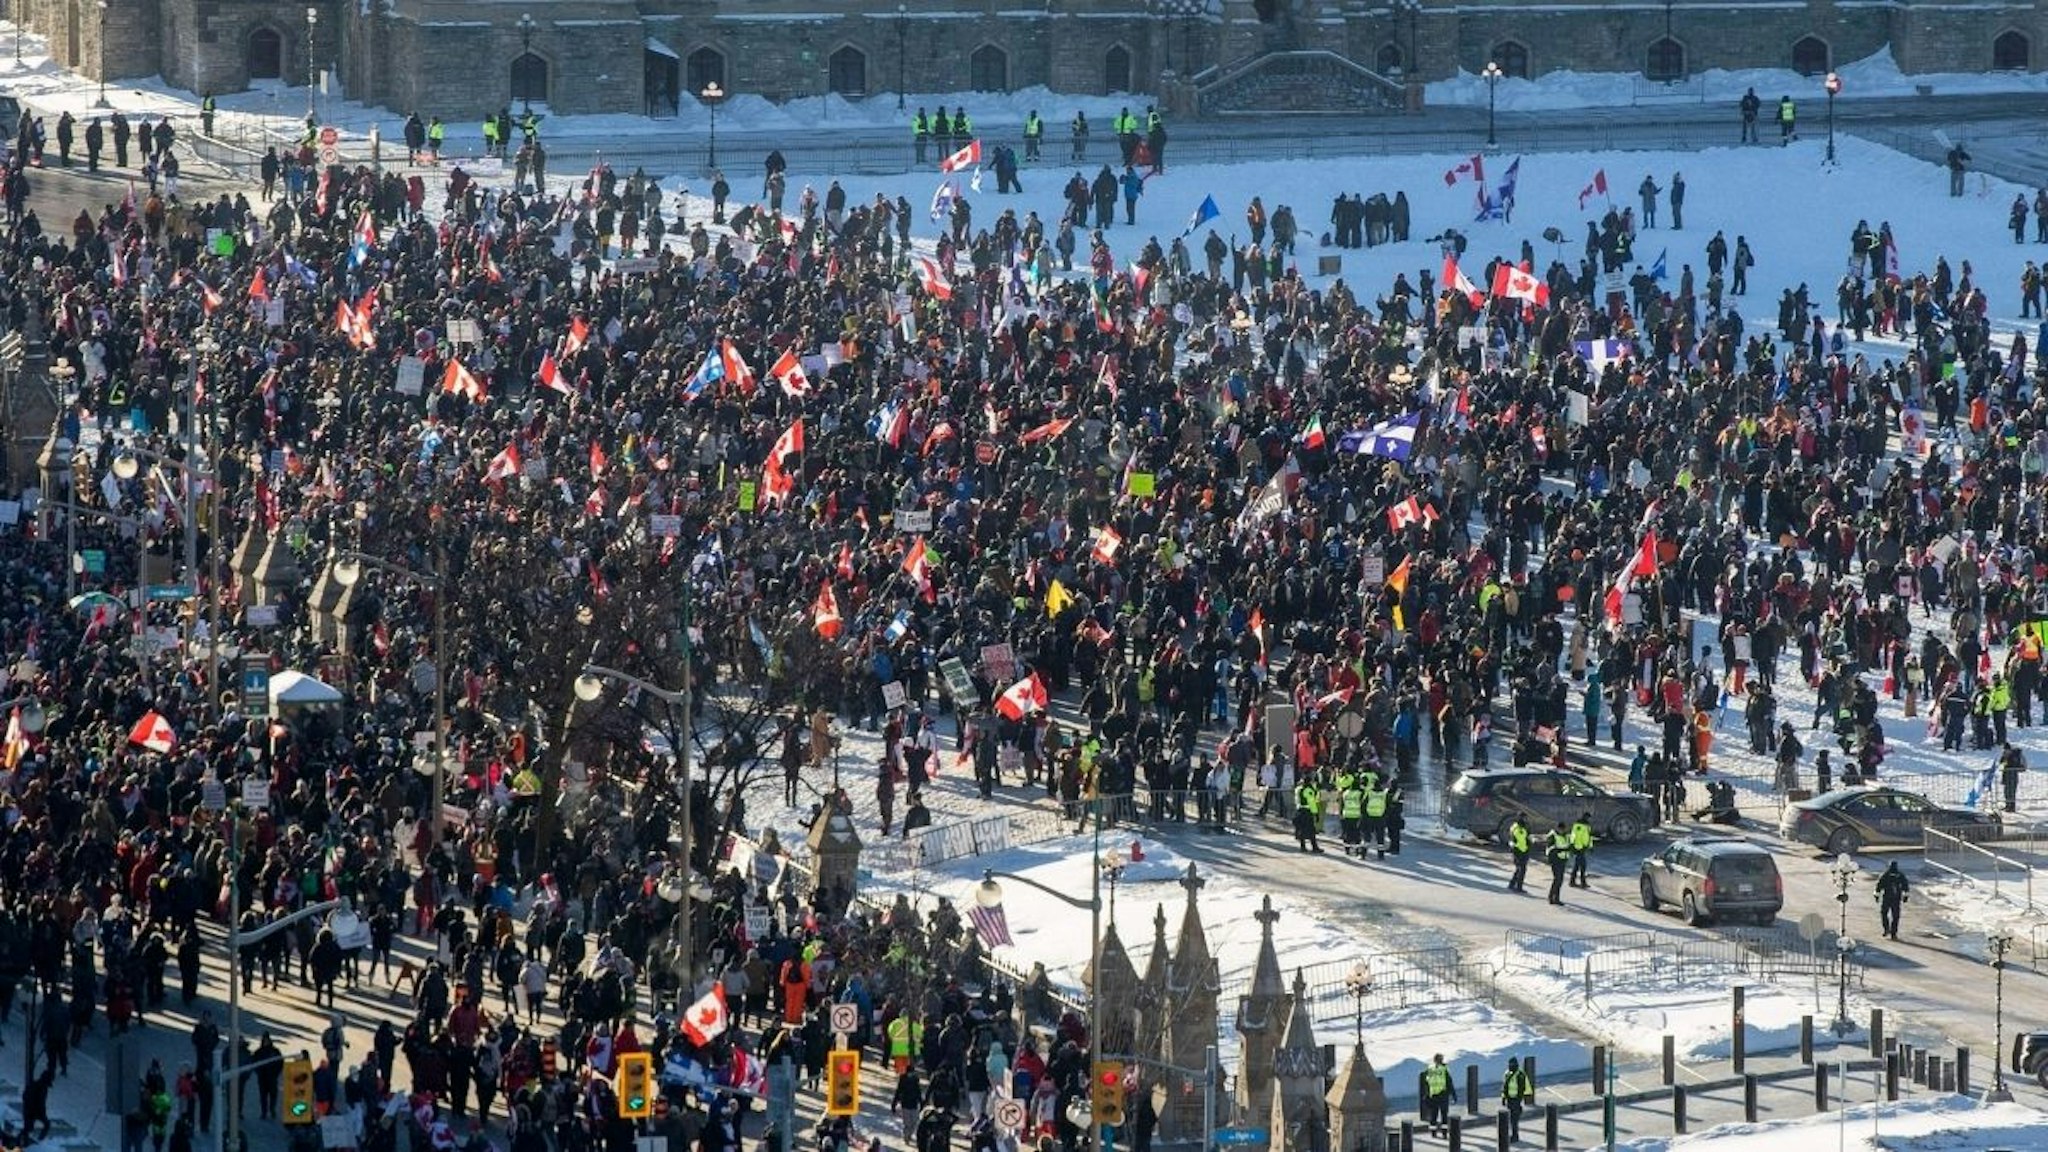 Supporters arrive at Parliament Hill for the Freedom Truck Convoy to protest against Covid-19 vaccine mandates and restrictions in Ottawa, Canada, on January 29, 2022.